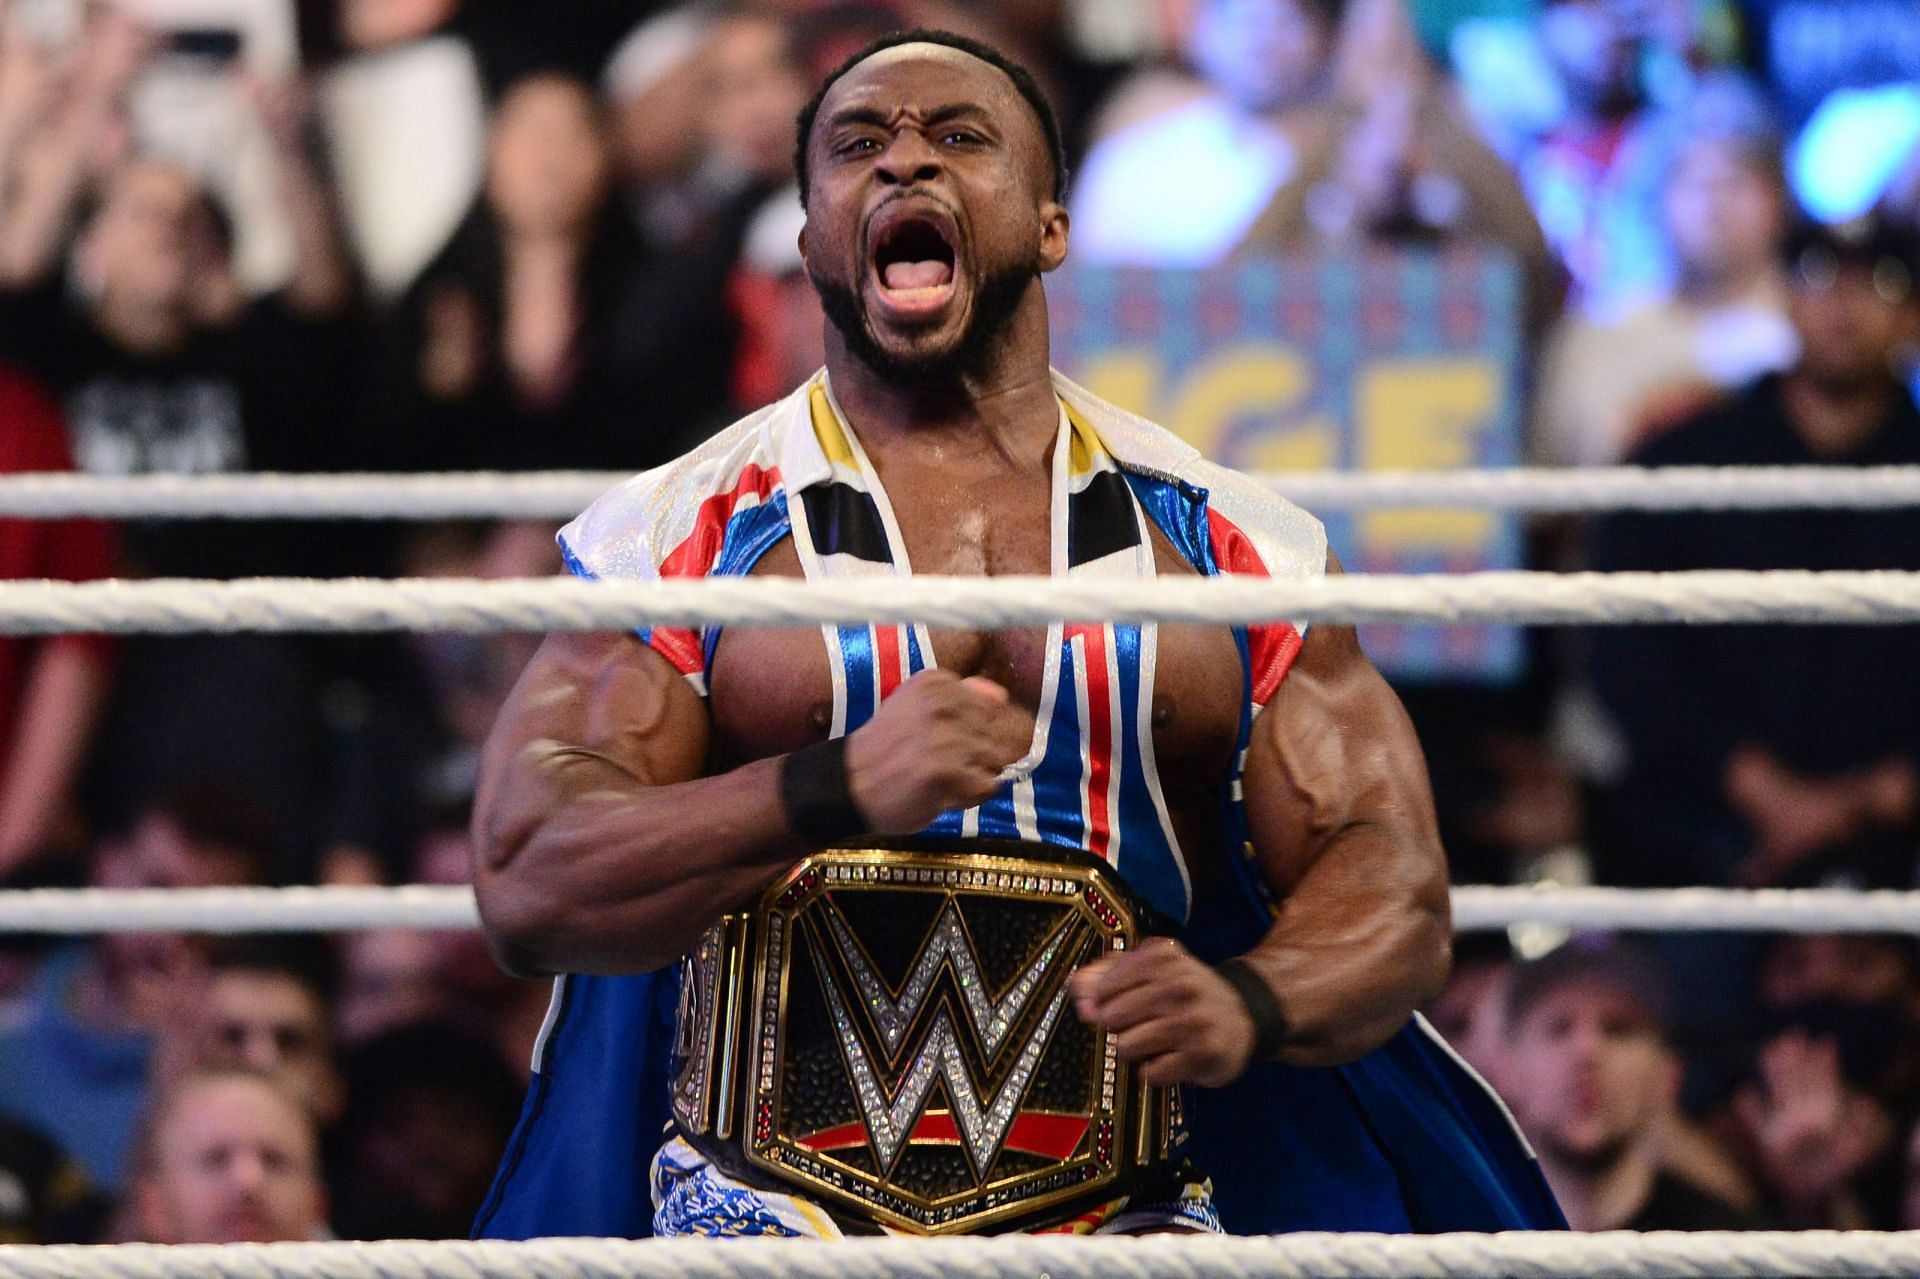 Big E cashed in the MITB contract to become WWE Champion